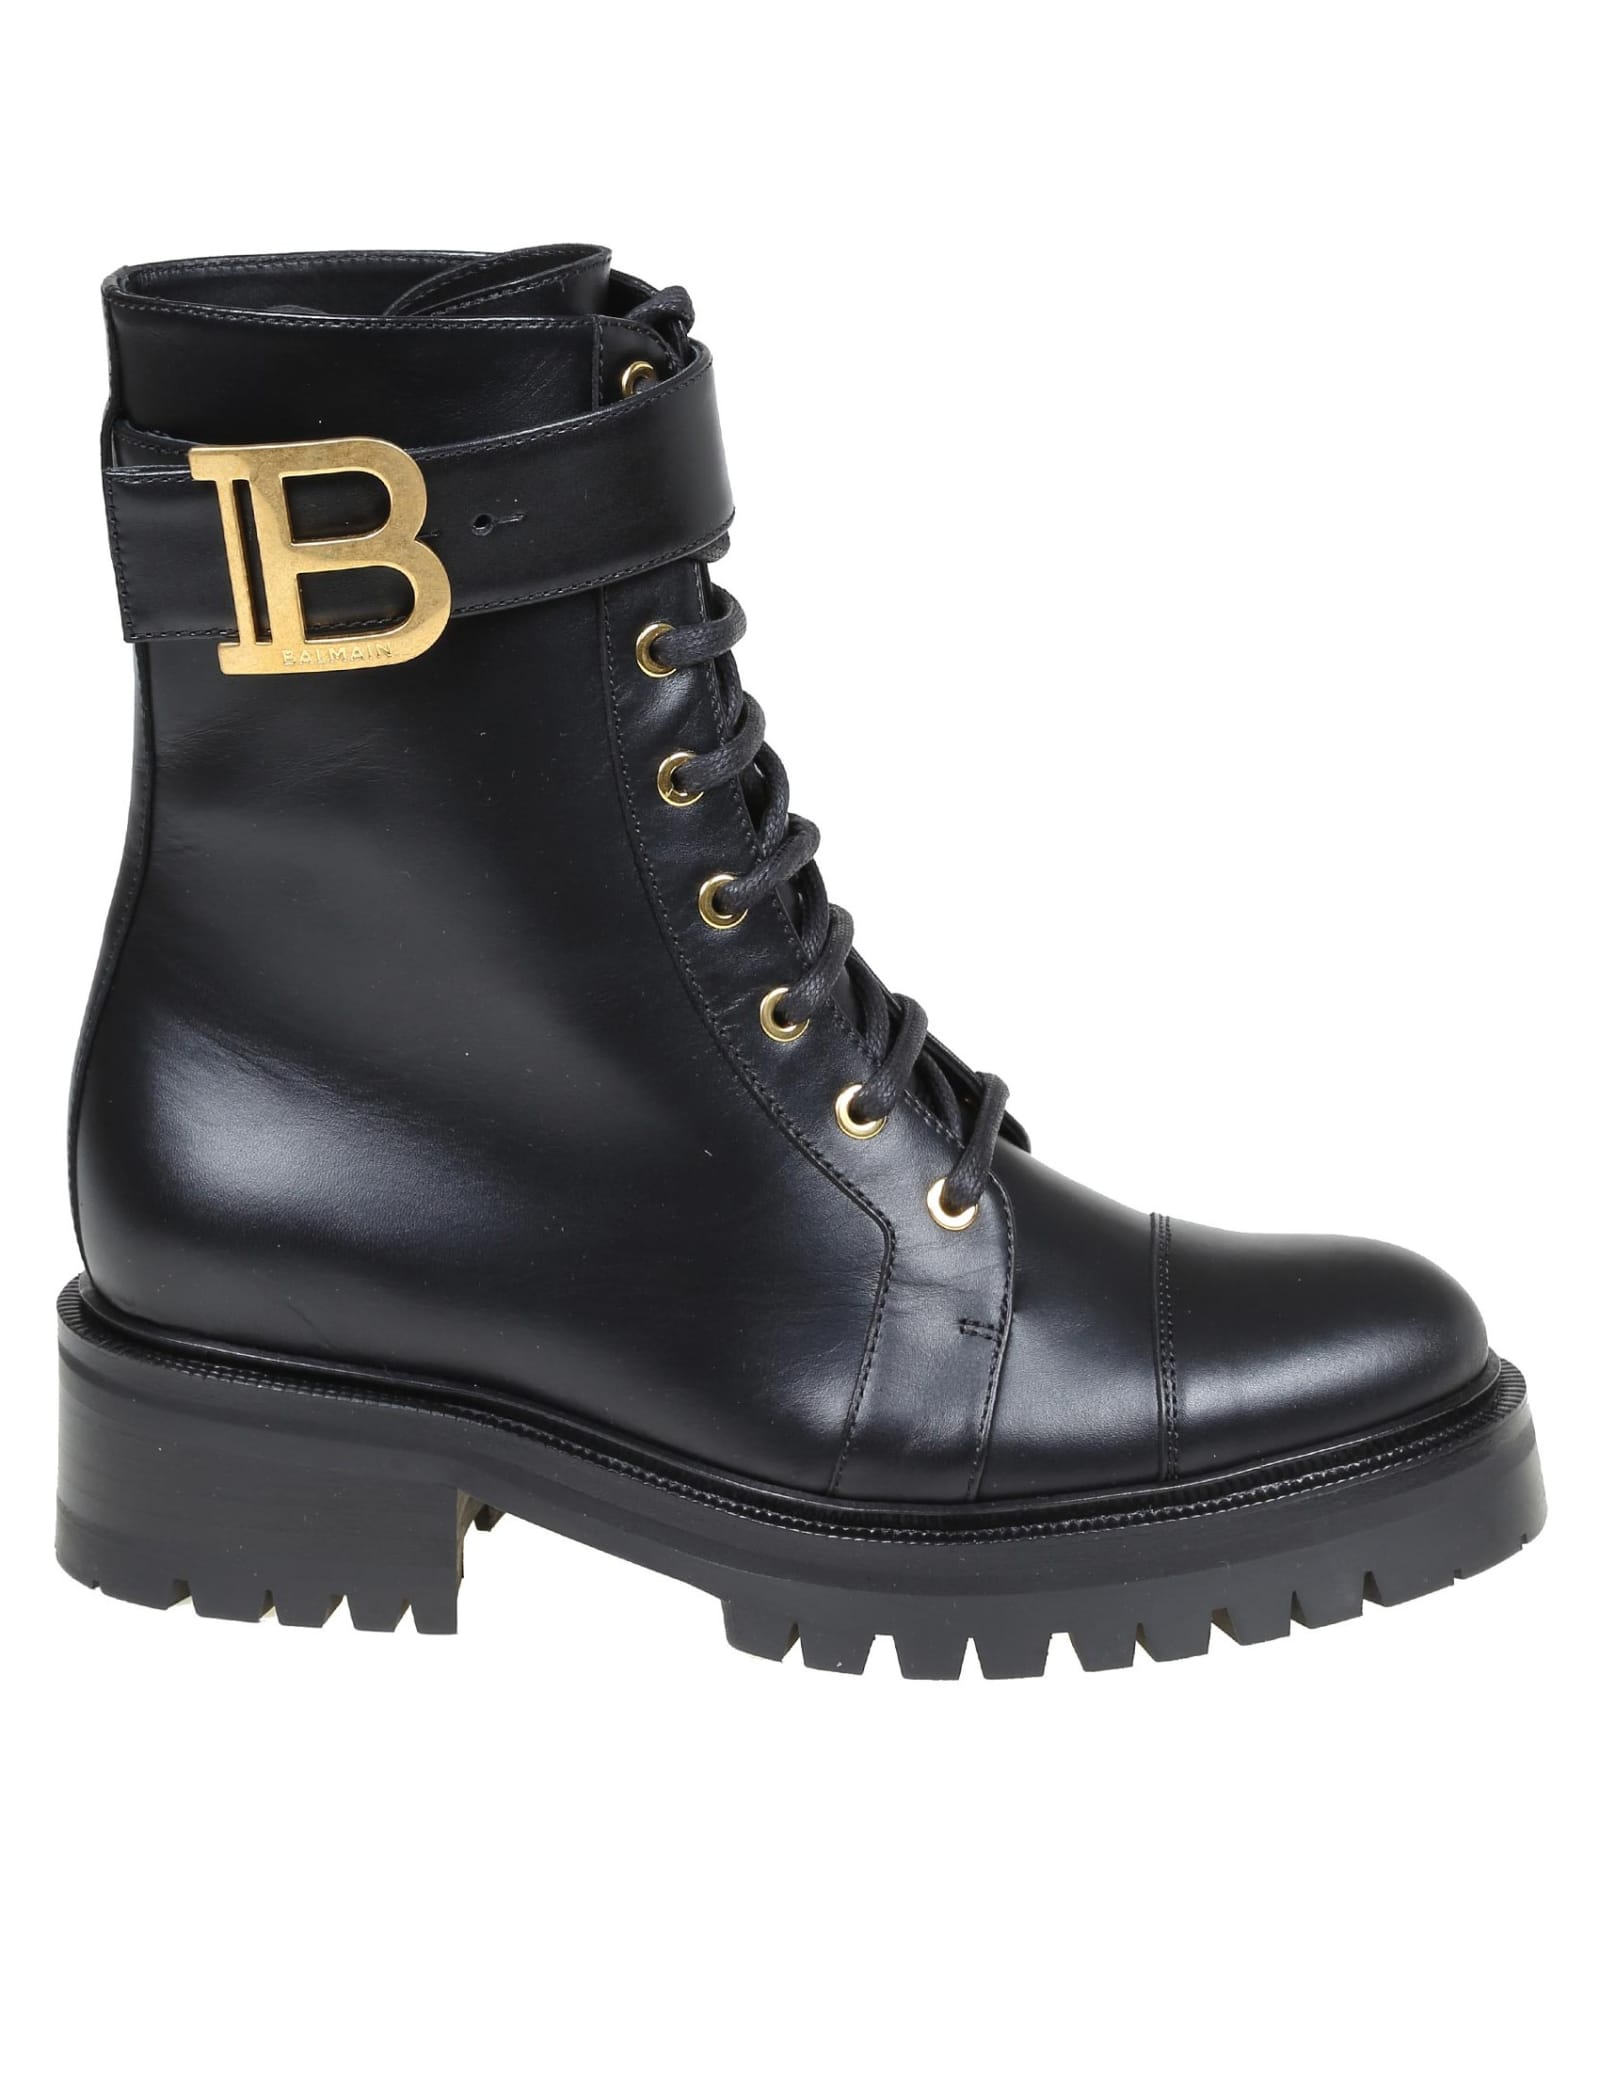 Buy Balmain Ranger Boot In Black Leather online, shop Balmain shoes with free shipping